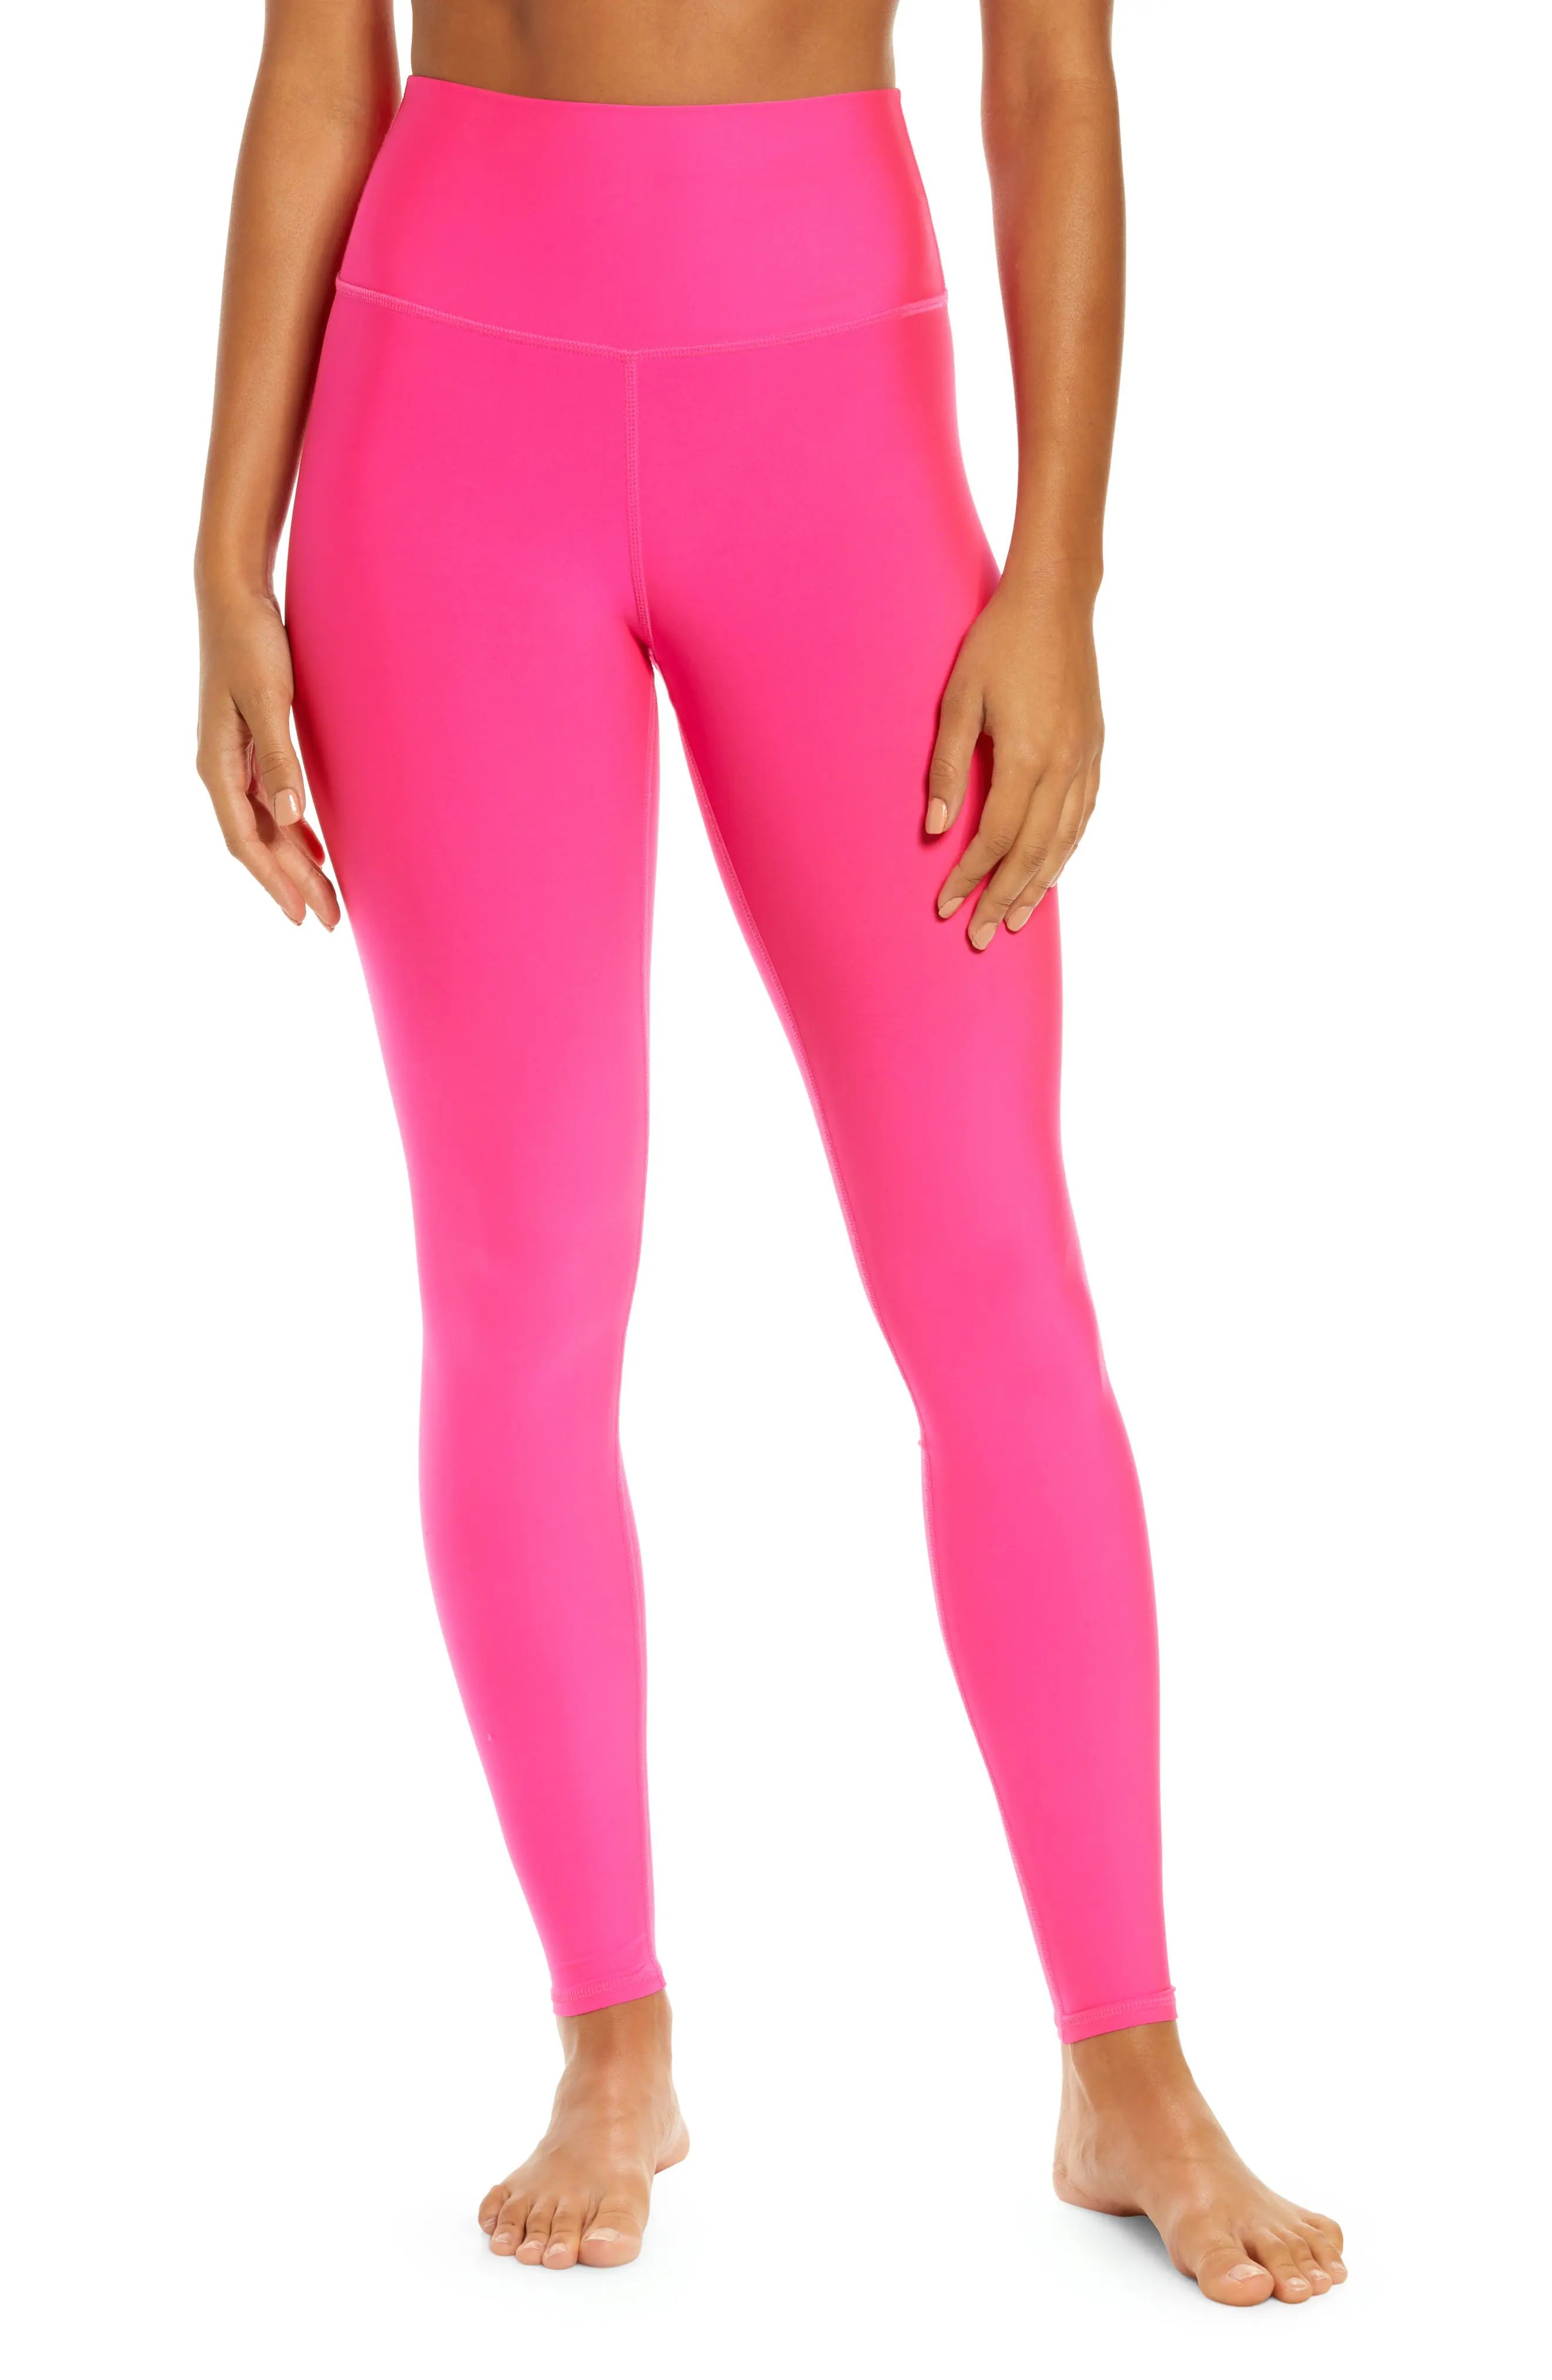 Alo Airlift High Waist Leggings in Neon Pink at Nordstrom, Size Small | Nordstrom